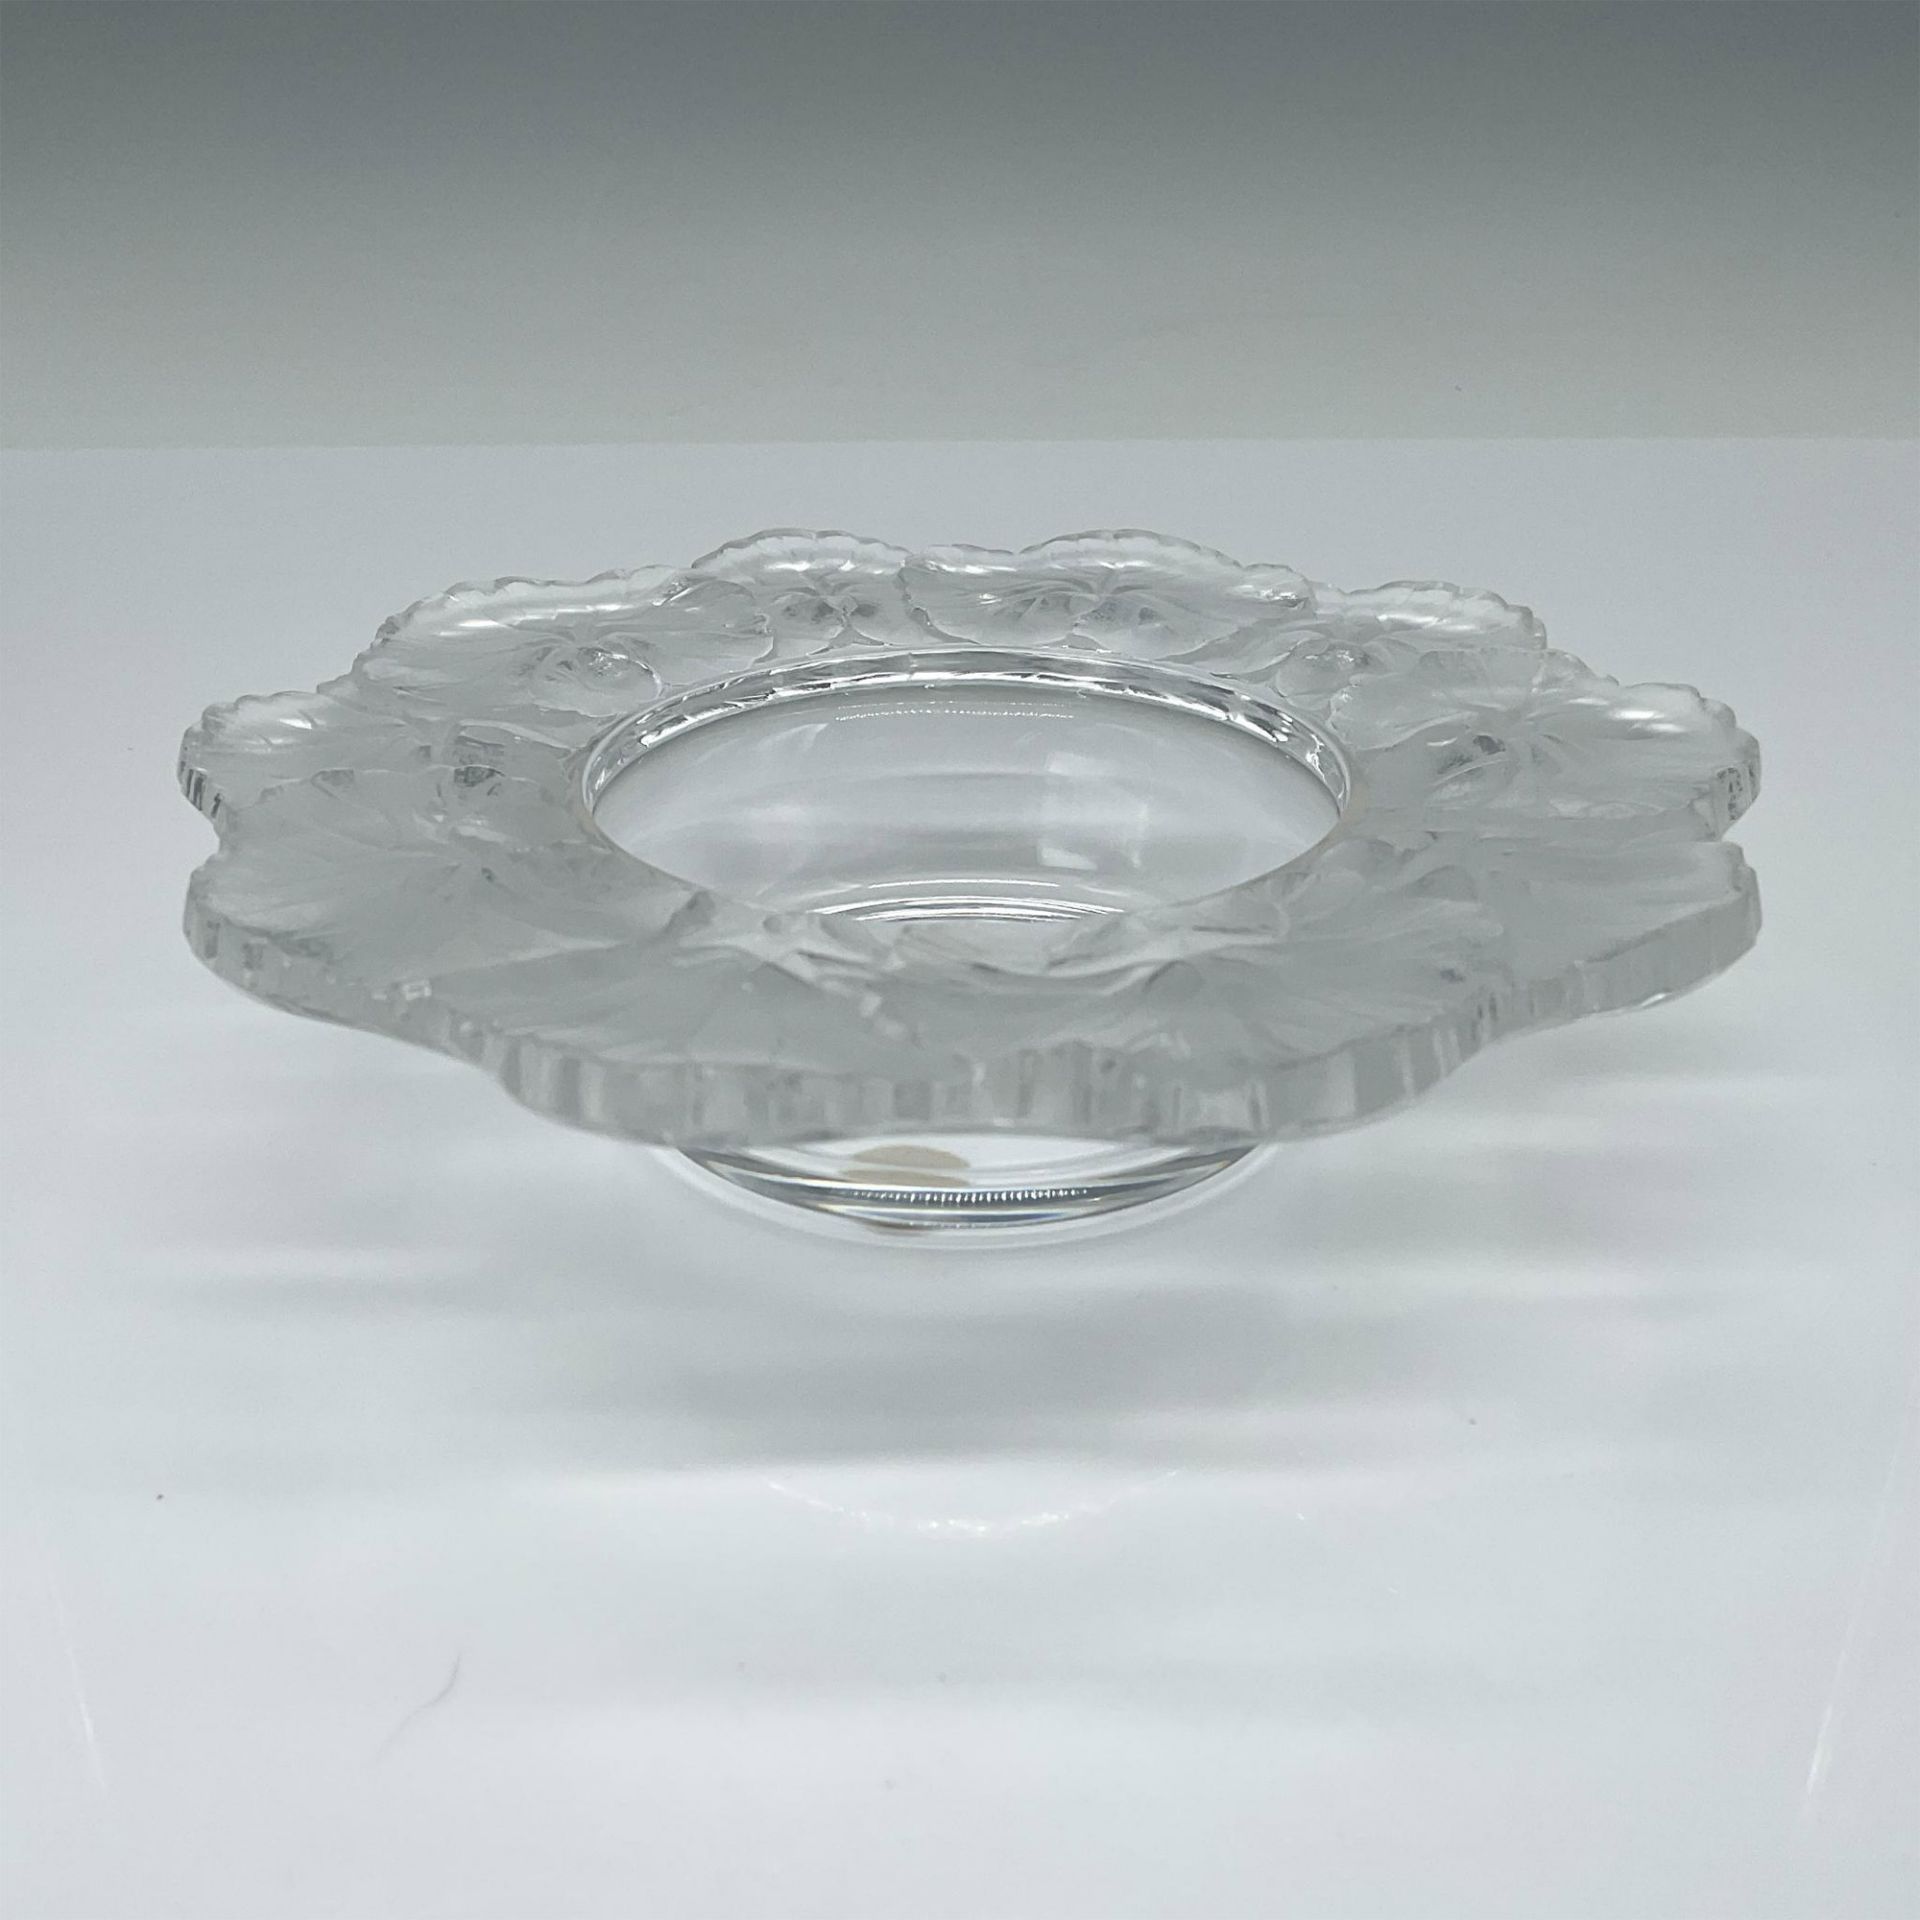 Lalique Crystal Candle Dish, Geraniums or Honfleur - Image 2 of 3